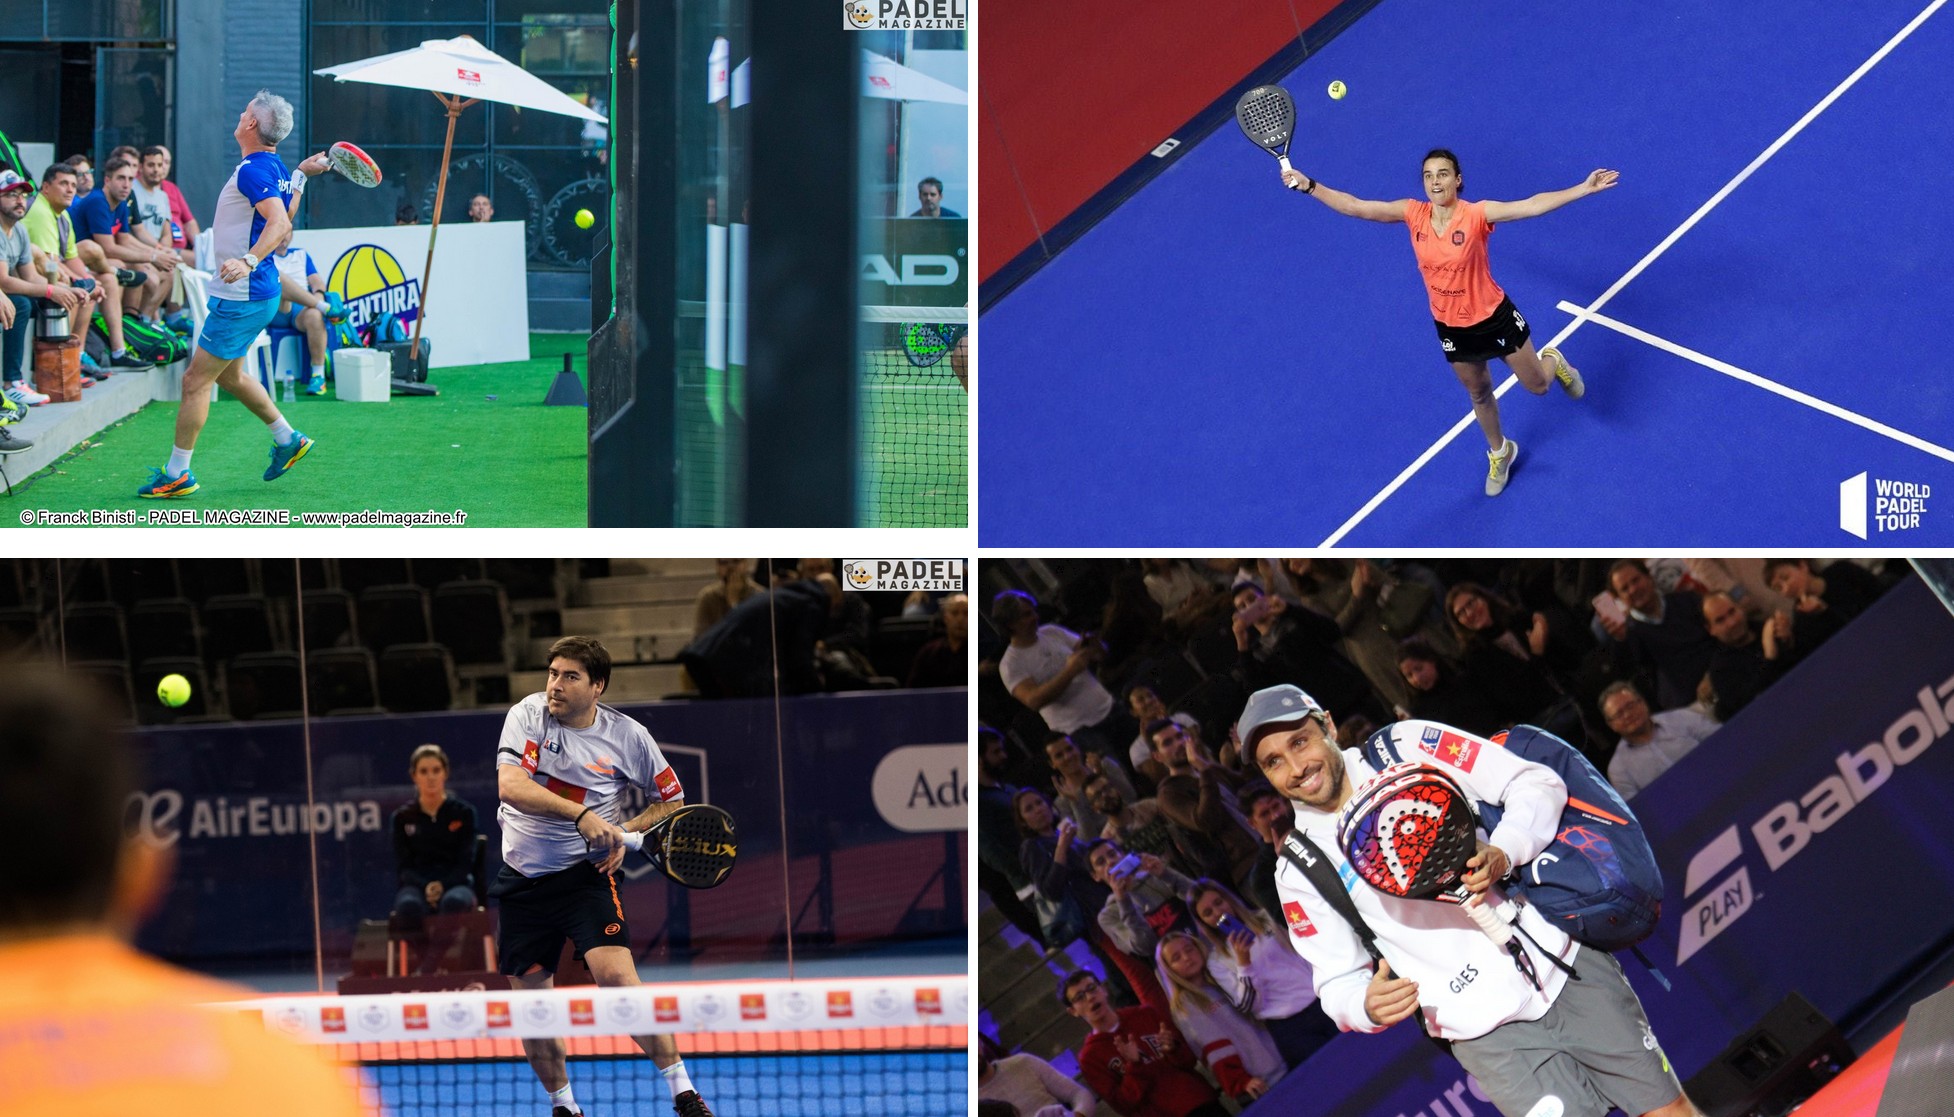 An age limit for the Padel high level ?